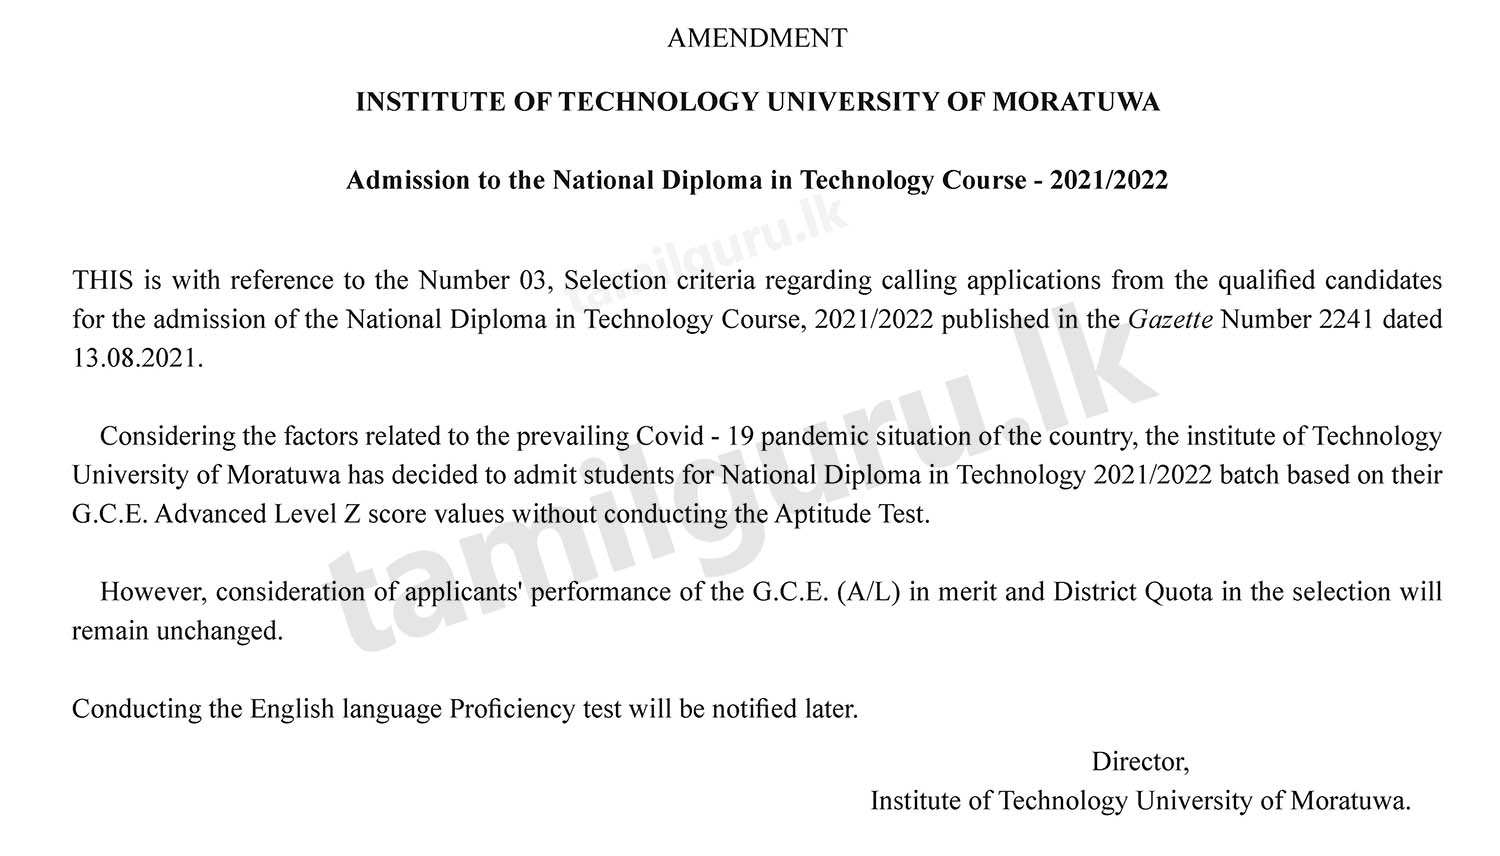 Important Notice for Applicants on Cancellation of the Aptitude Test - NDT Intake 2021/2022 (Notice in English)